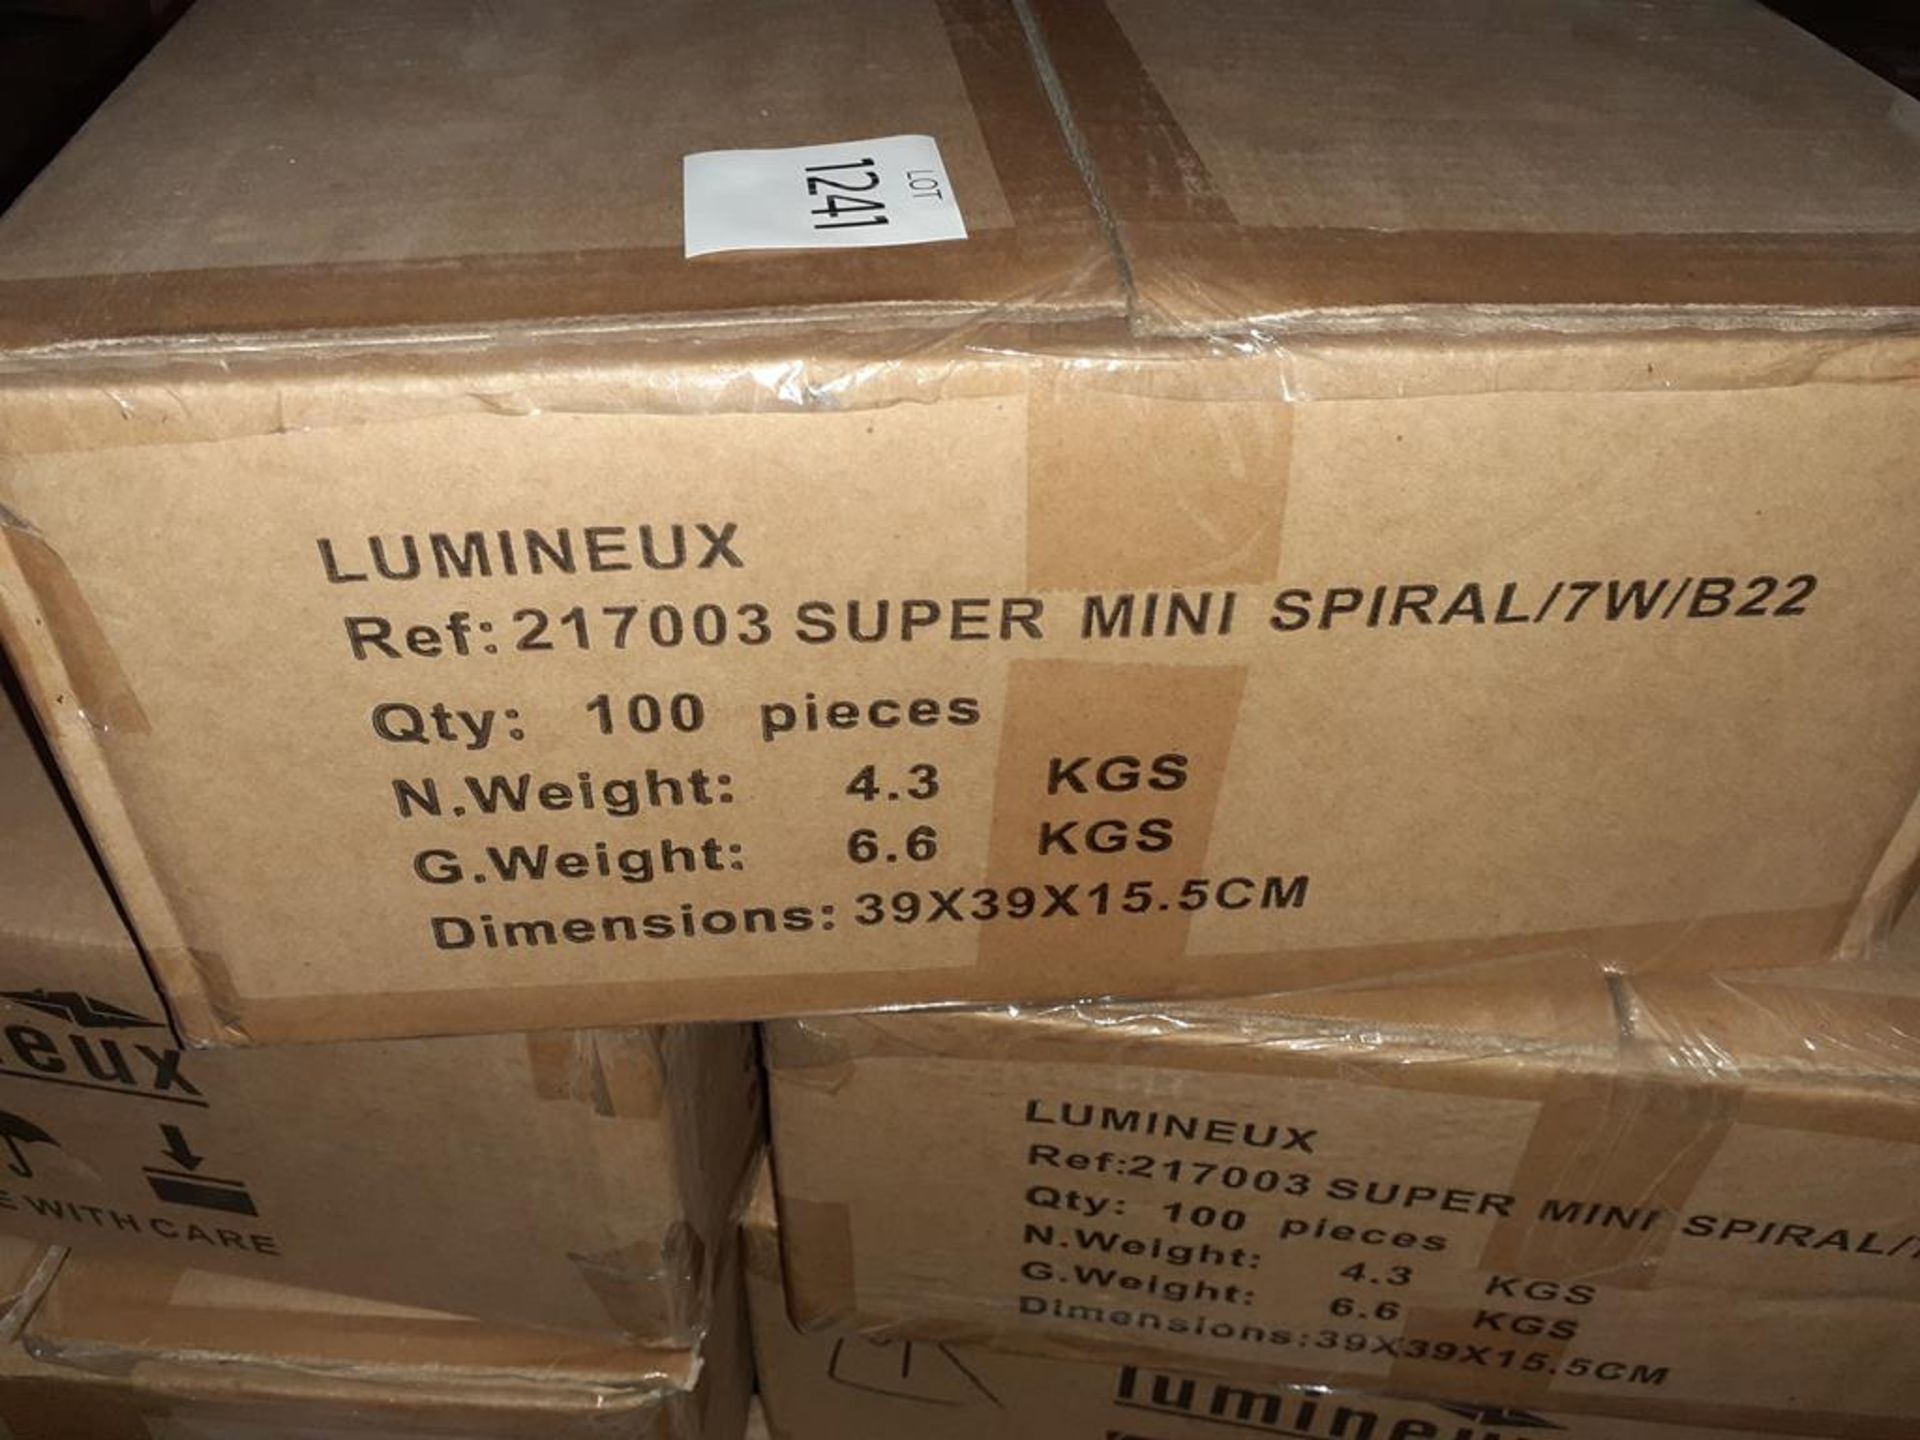 5 x boxes of Lumineux - Image 2 of 2